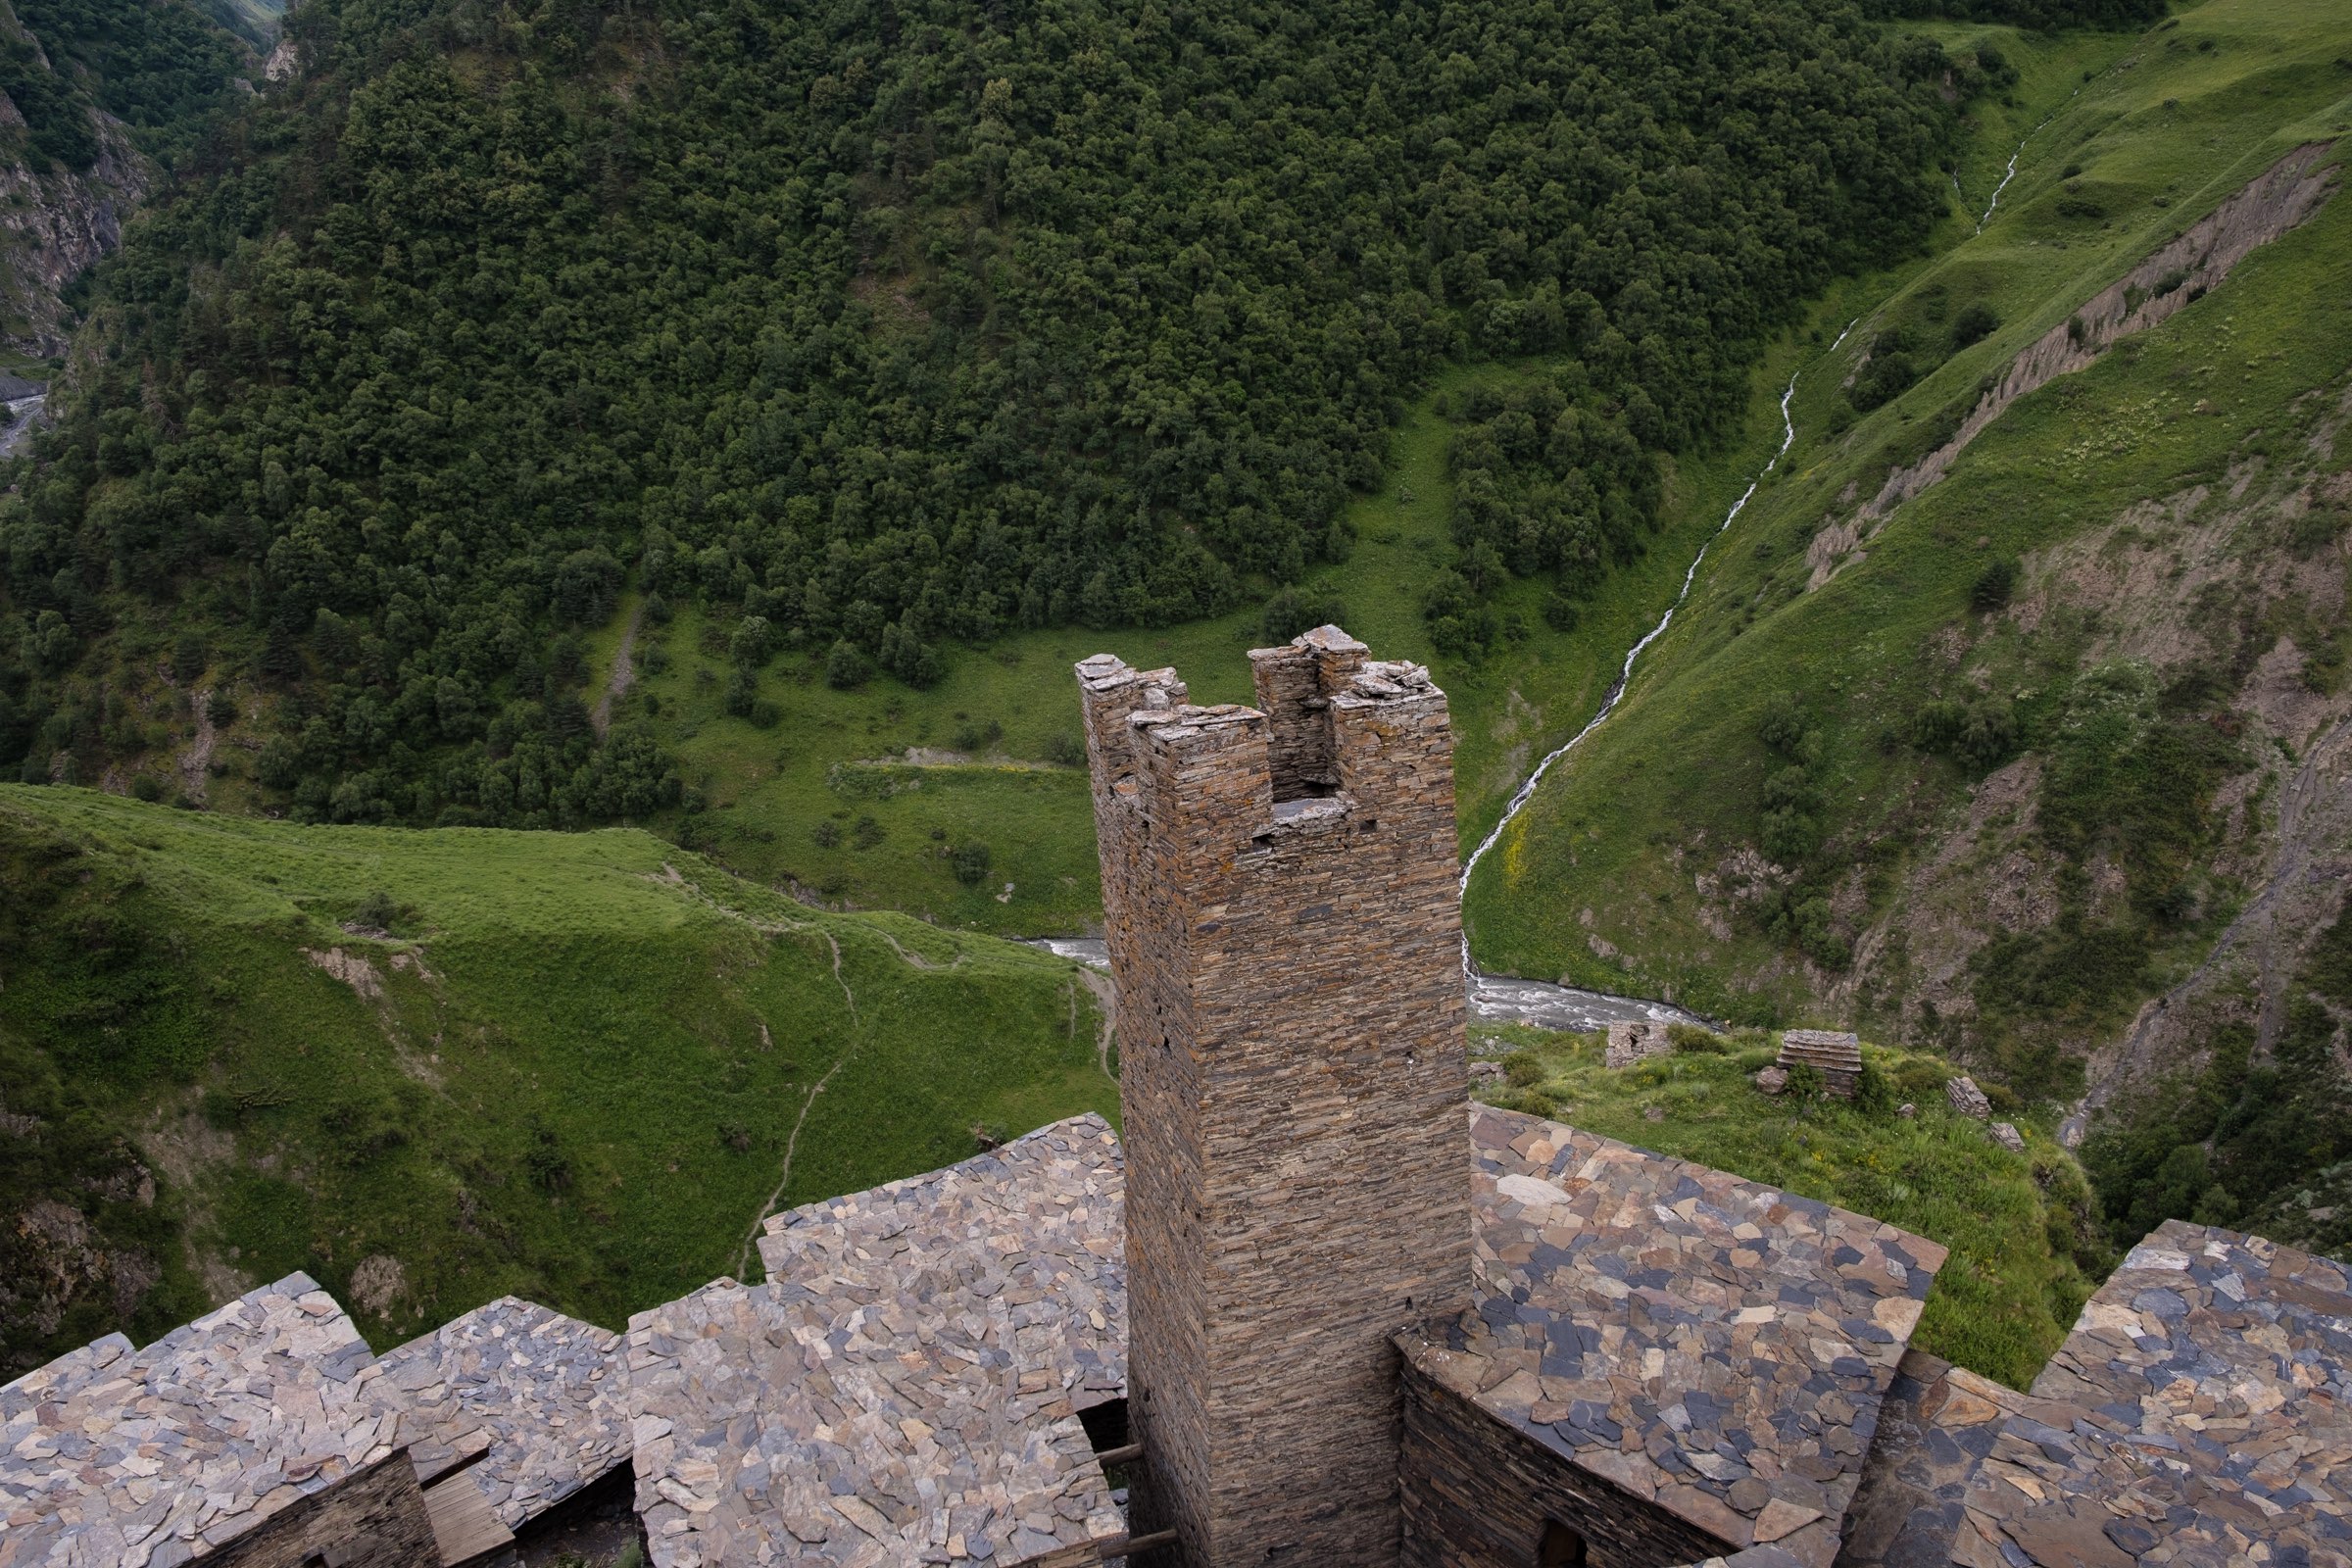 The view from Mutso fortress with lush green landscape and medieval tower